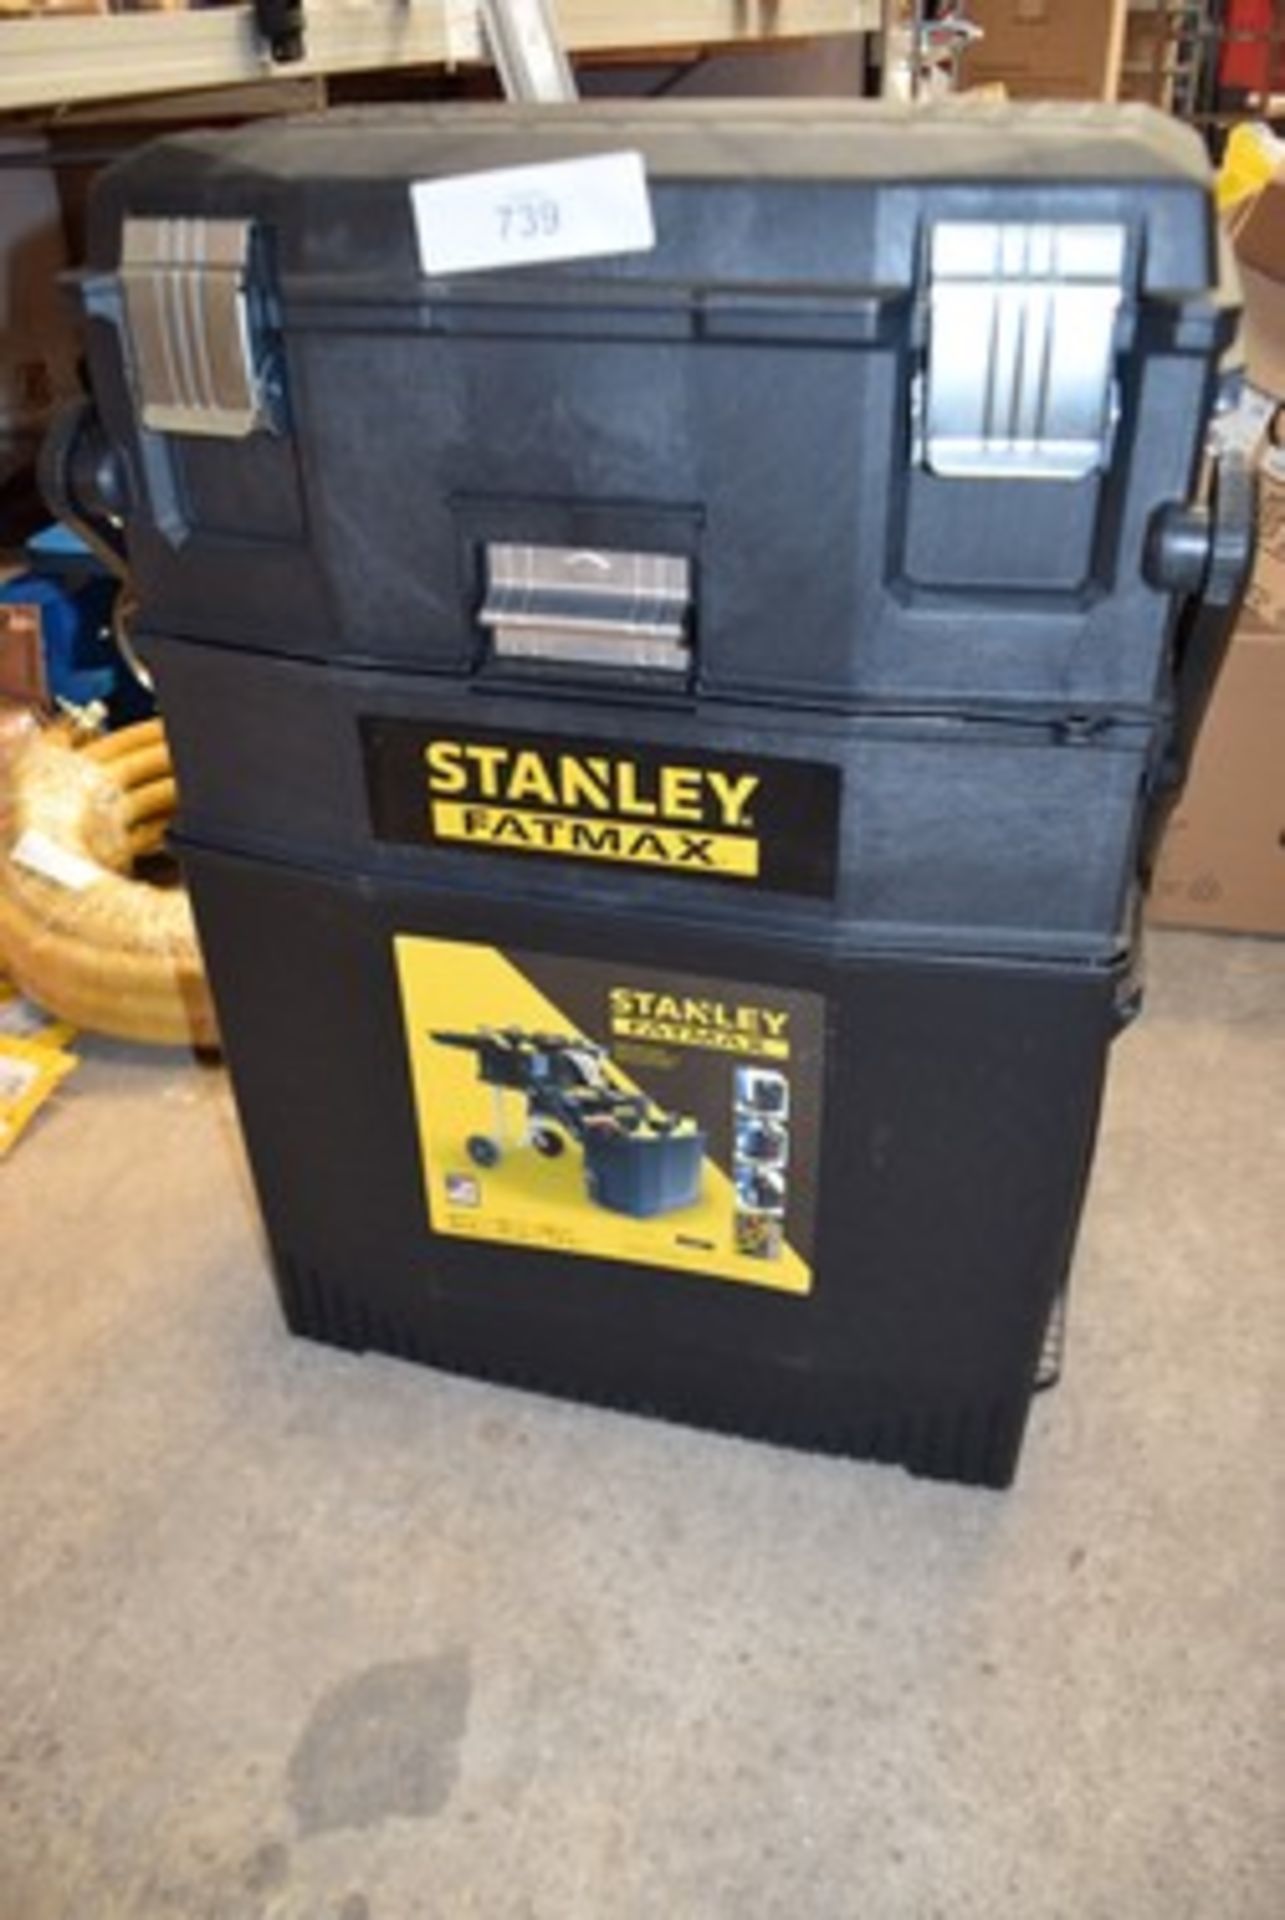 1 x Stanley Fatmax mobile workstation, code 1.94-210, size 54.9 x 41.3 x 73.3cm, some marks due to - Image 2 of 5